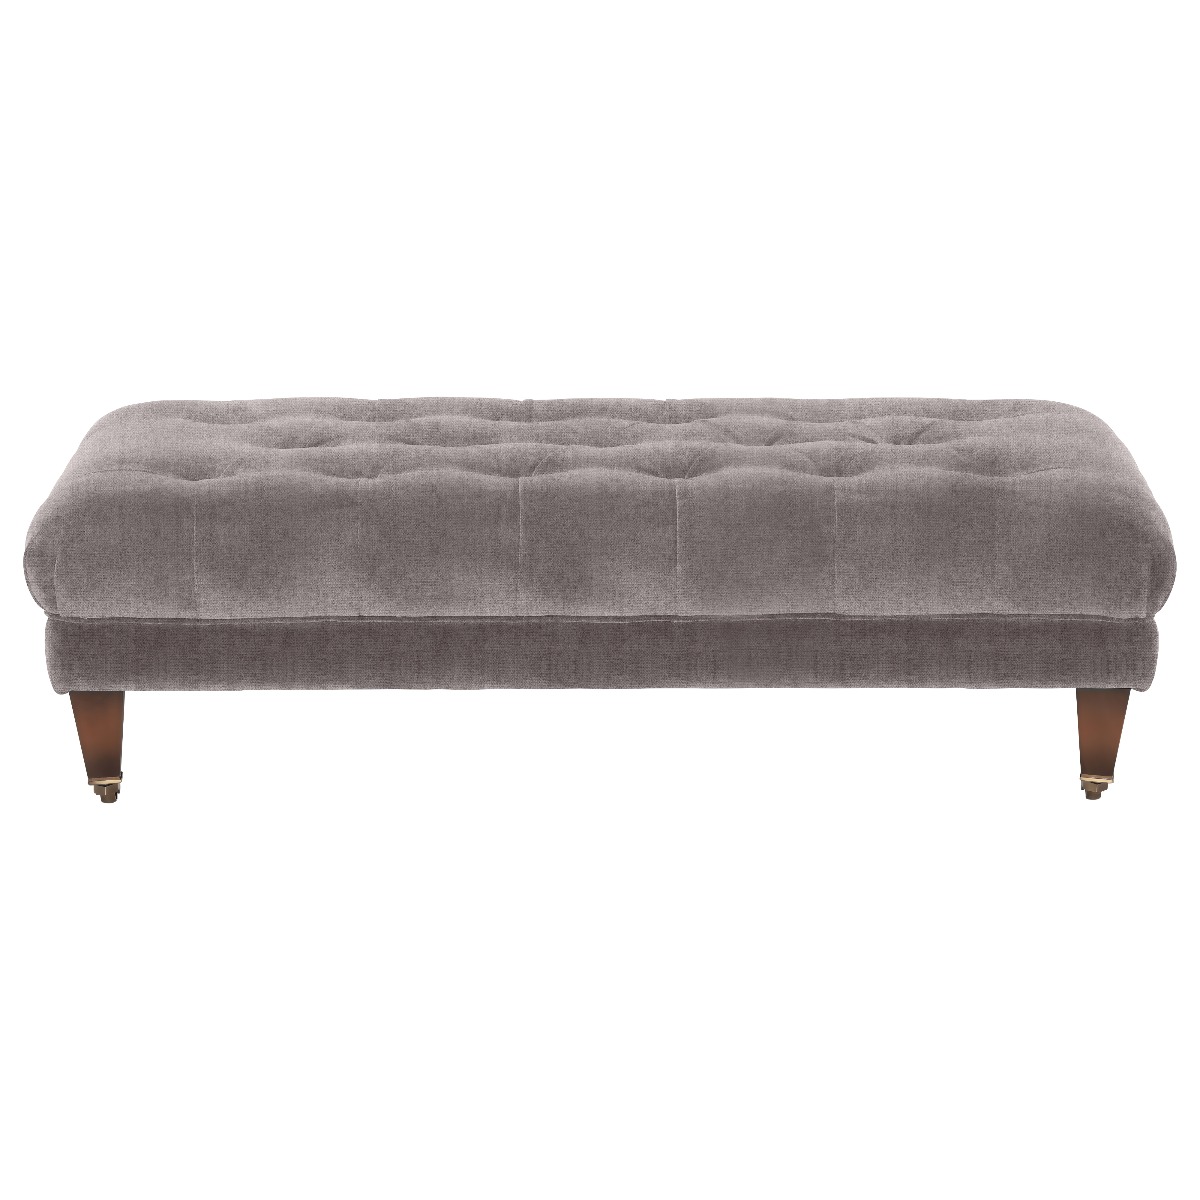 Blackwell Small Button Stool, Grey Fabric | Barker & Stonehouse